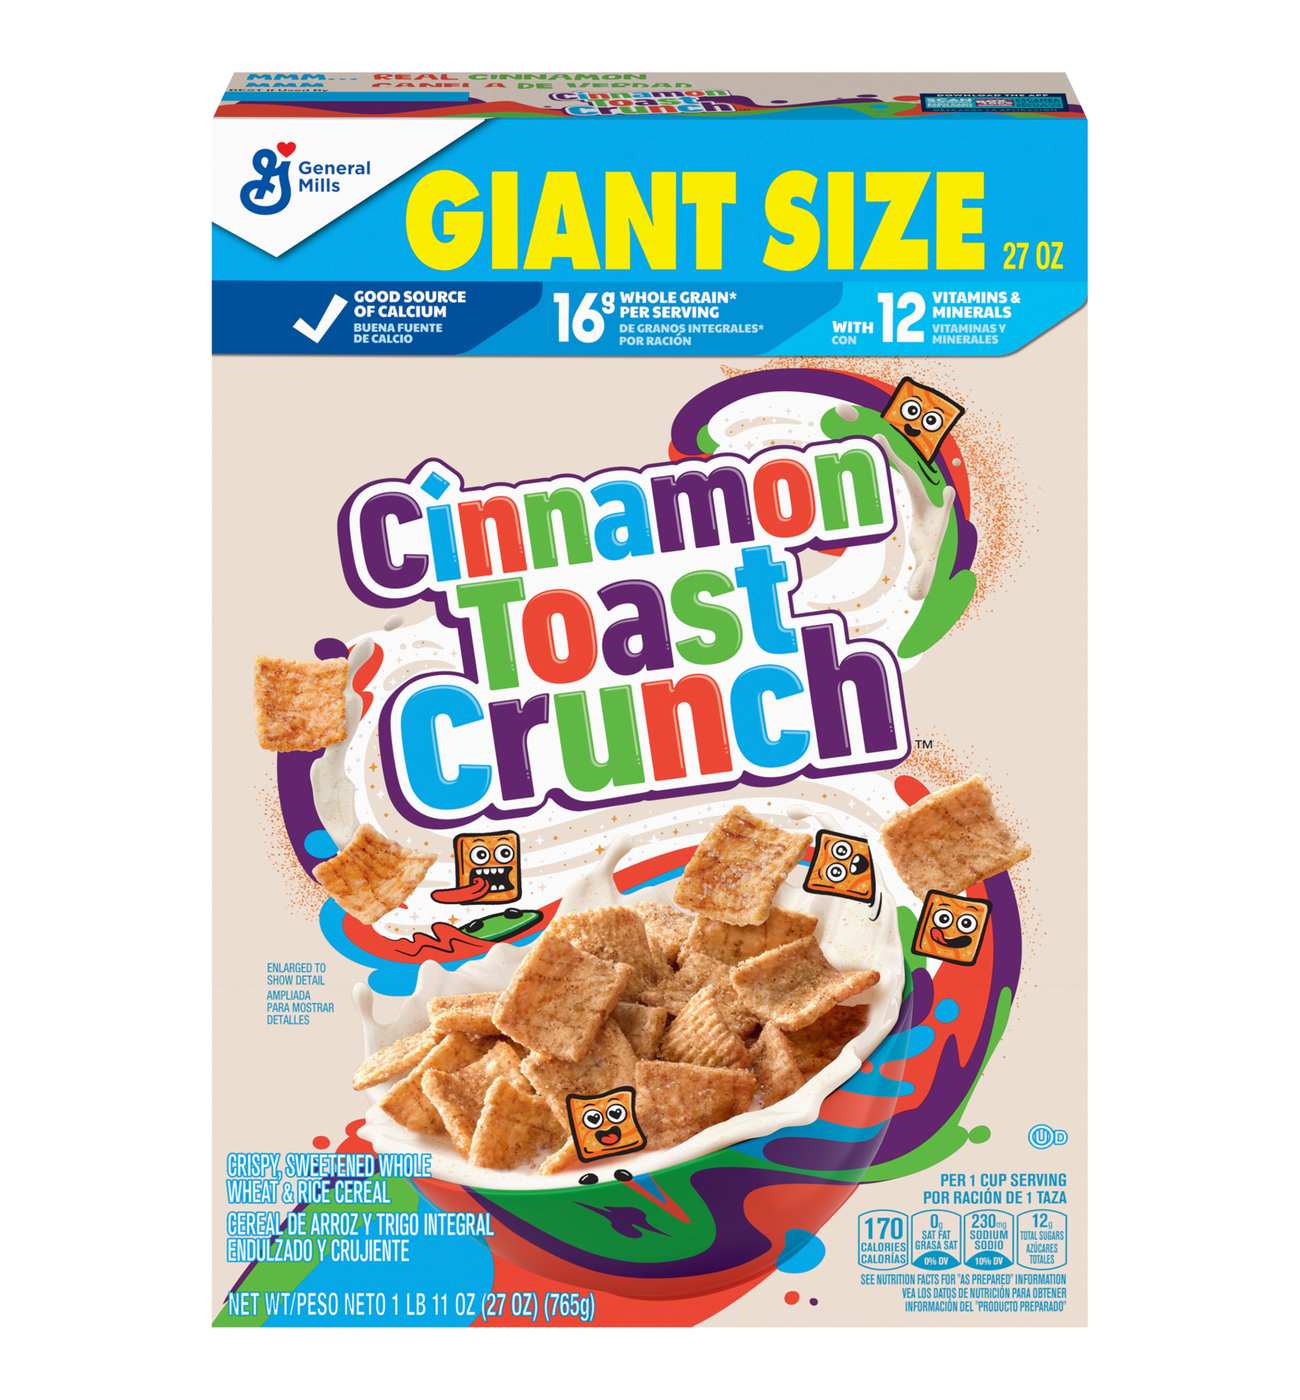 General Mills Cinnamon Toast Crunch Cereal - Giant Size; image 5 of 5